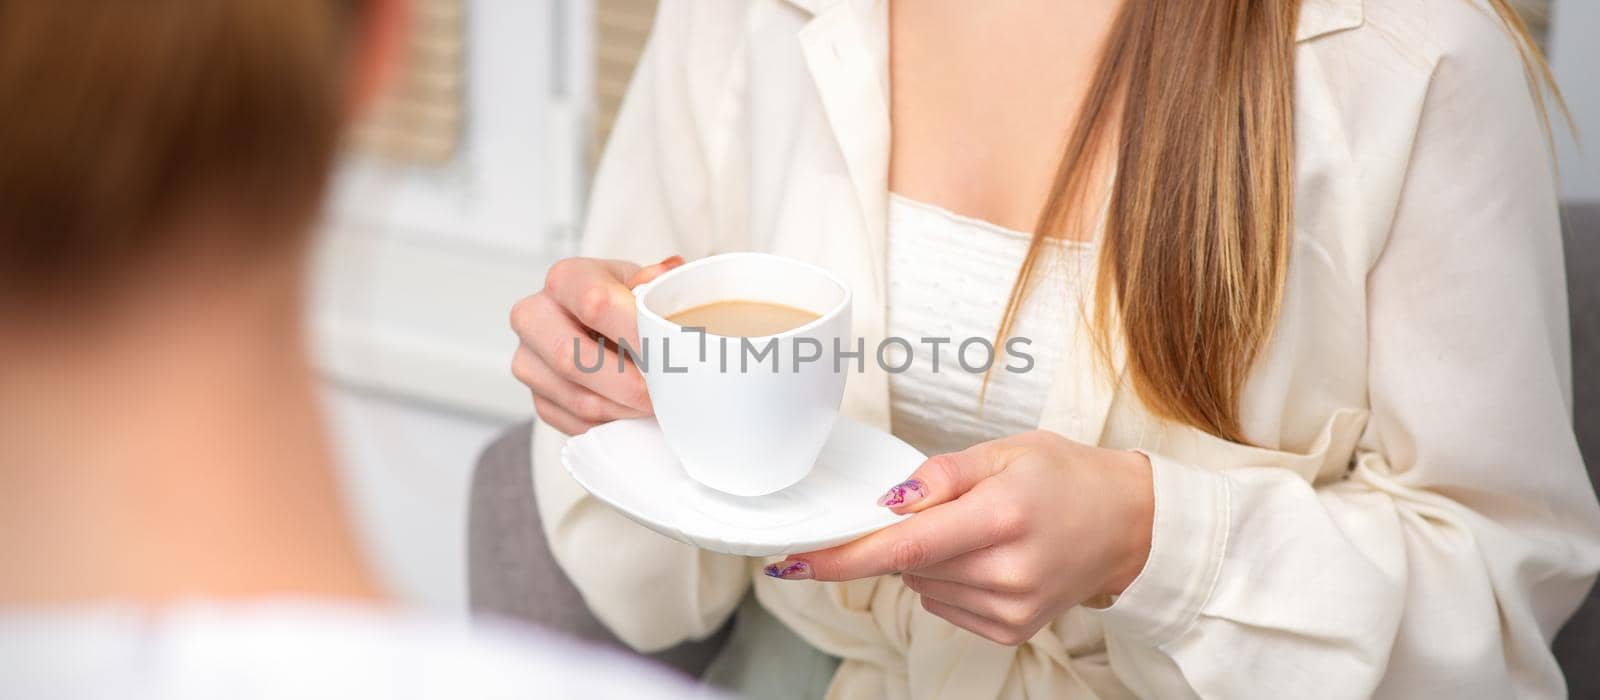 Young caucasian unrecognizable woman holding a cup of hot drink at a doctor's appointment in hospital office. by okskukuruza